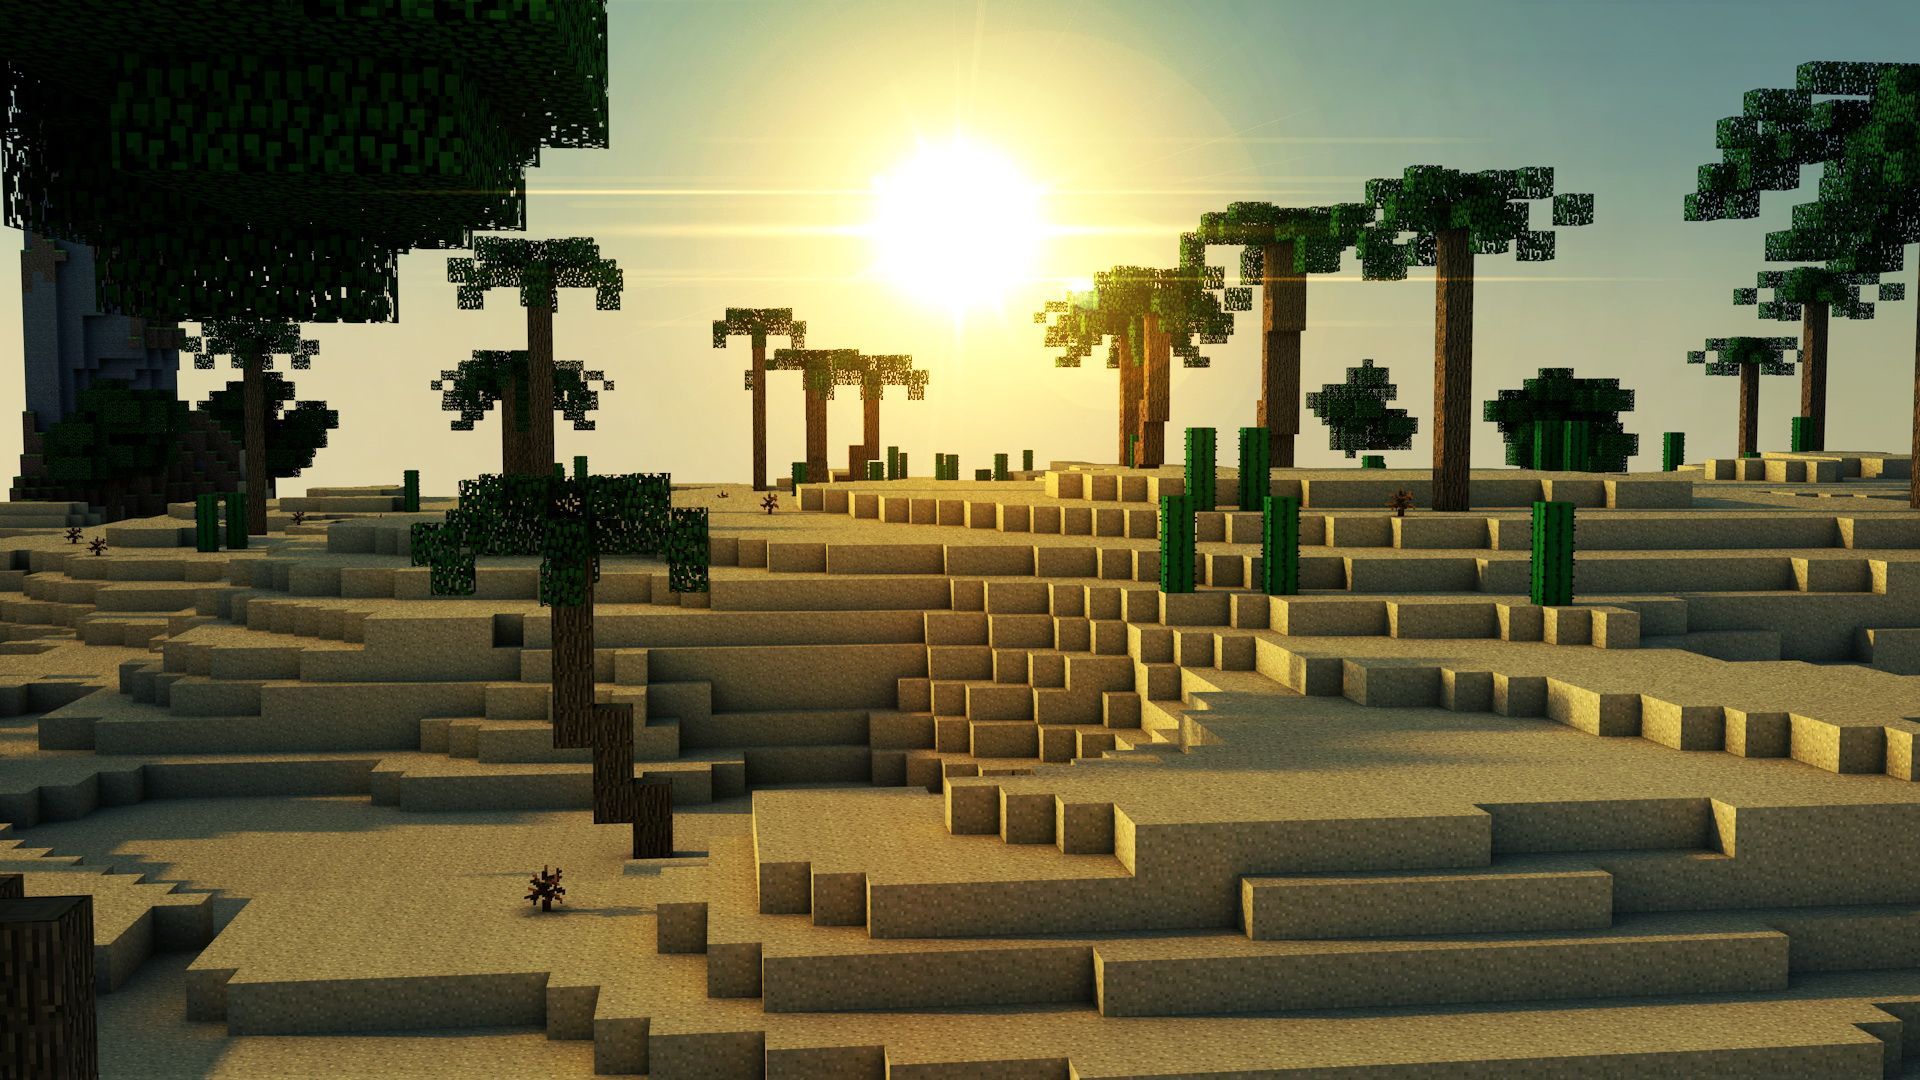 Images of Minecraft Wallpaper download free | Wallpapers ...